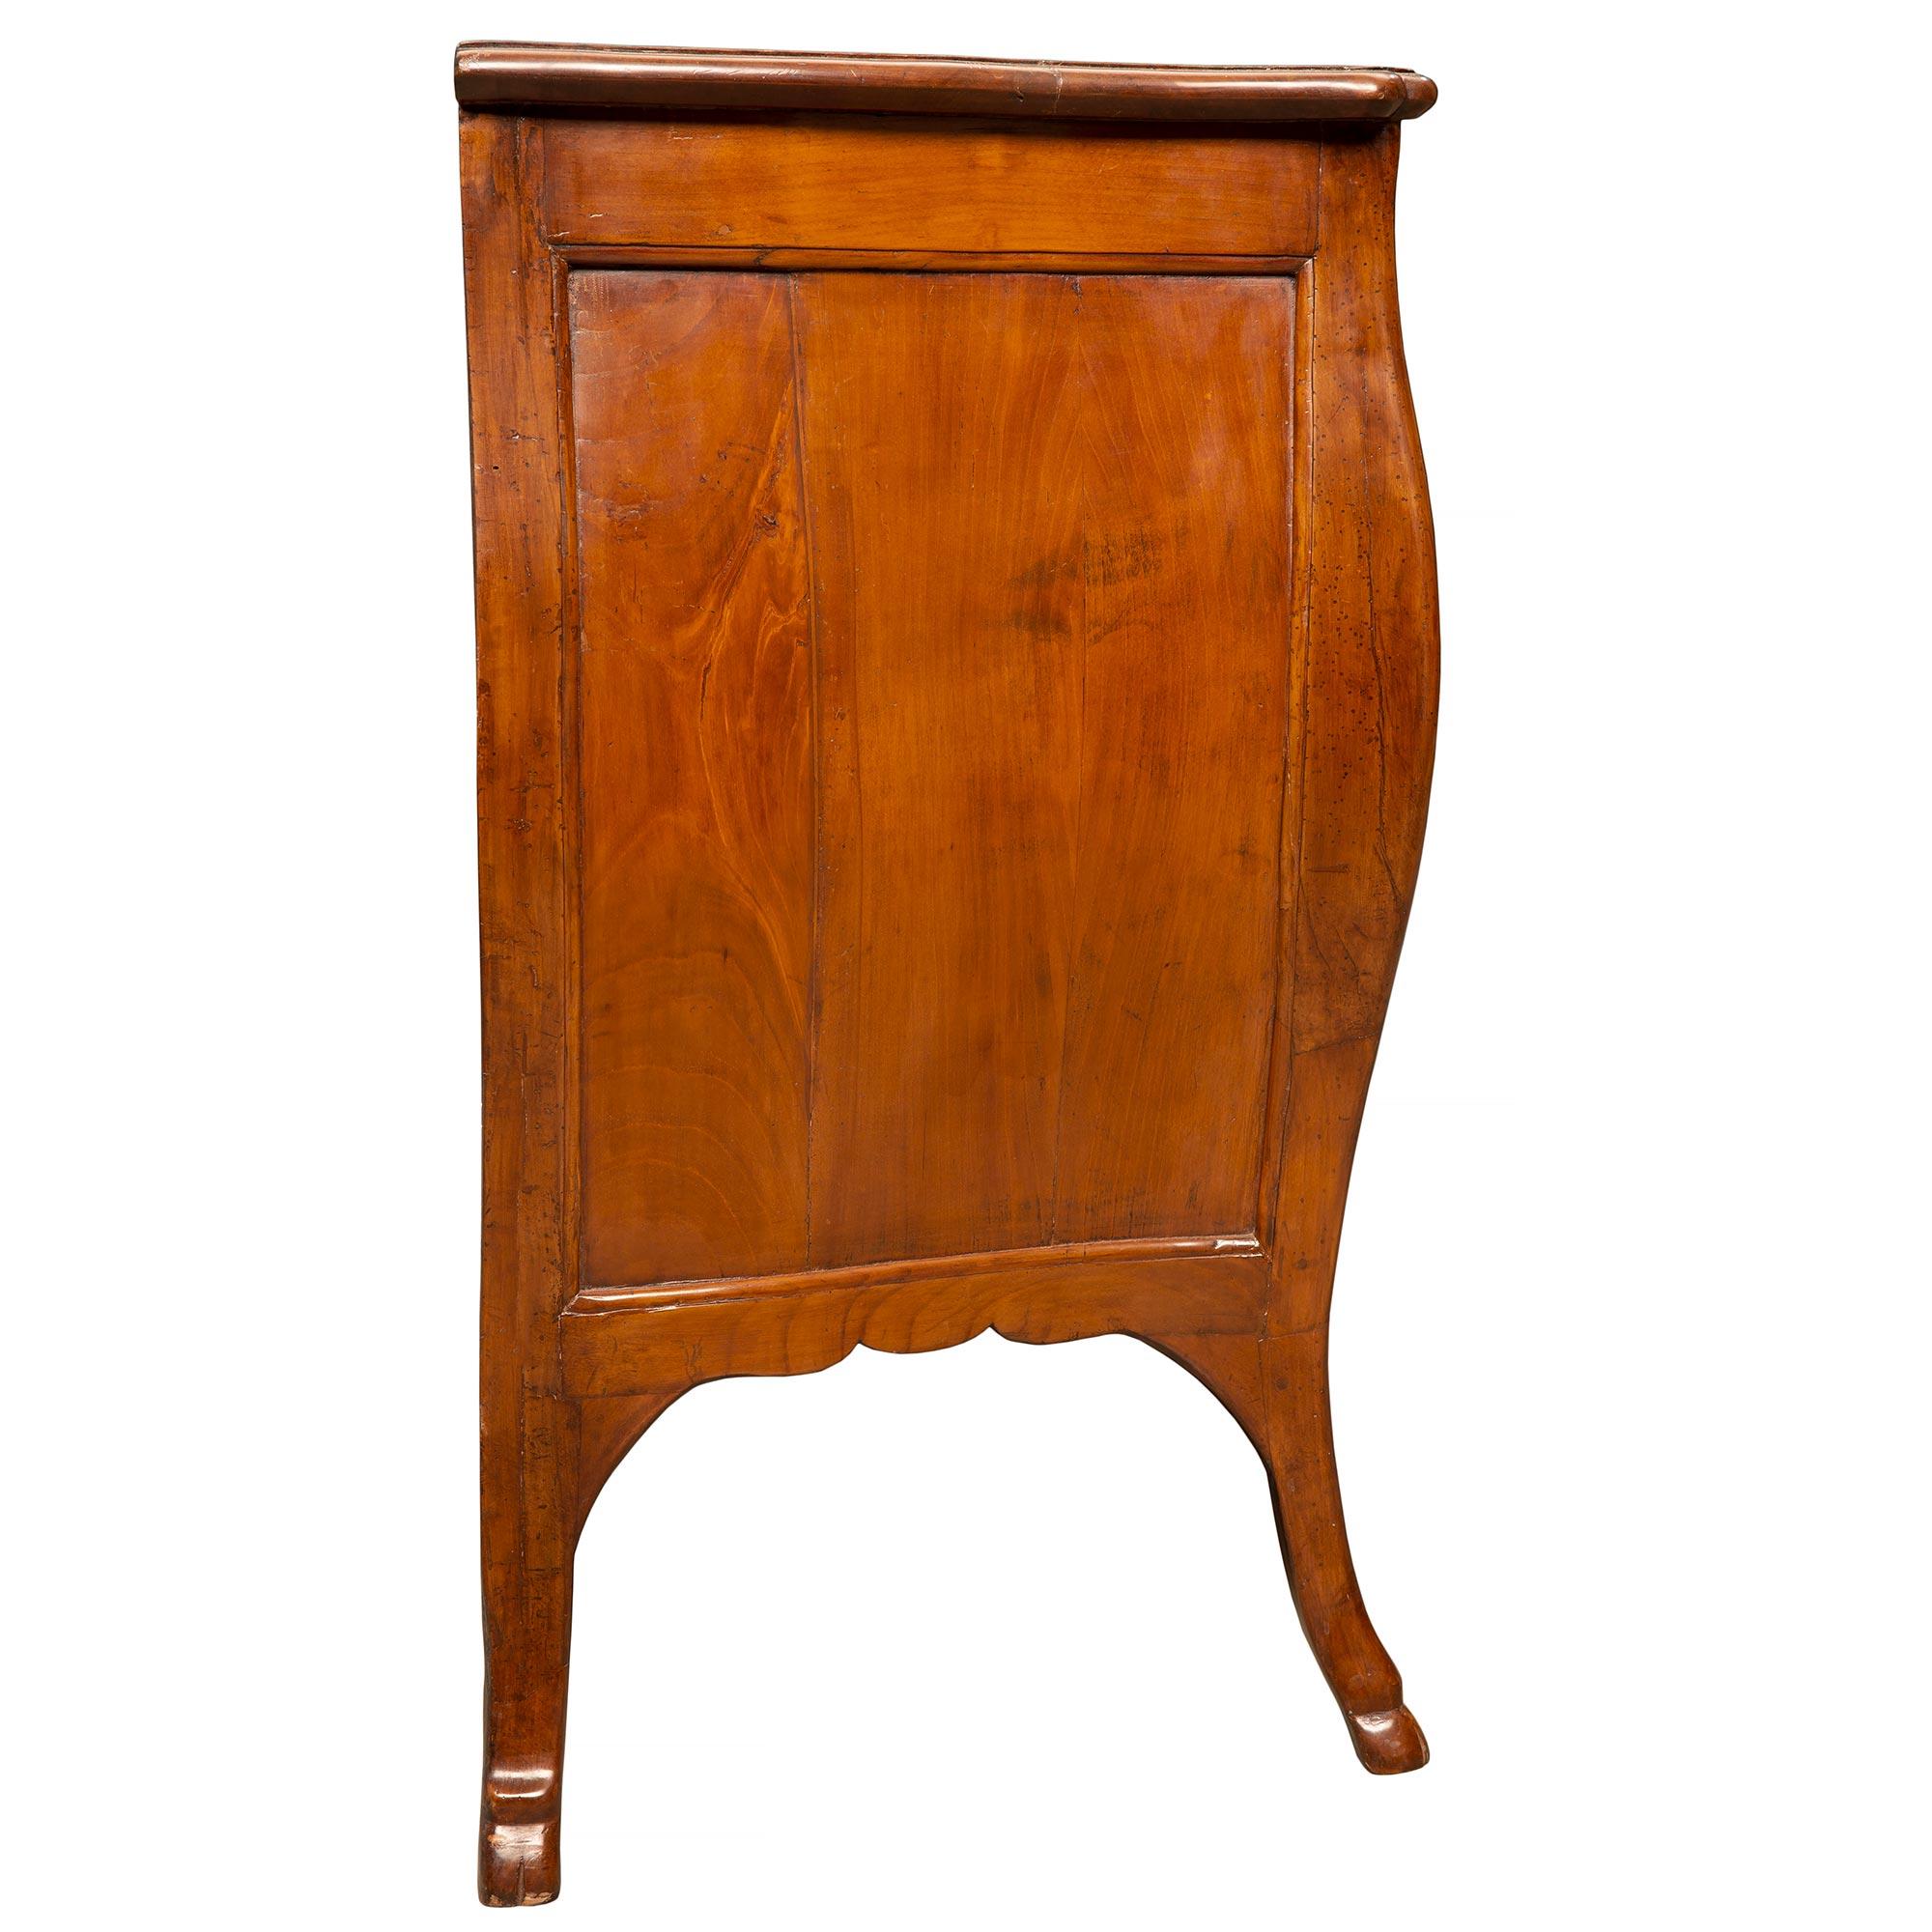 French 18th Century Louis XV Period Walnut Petite Commode Bordelaise For Sale 1